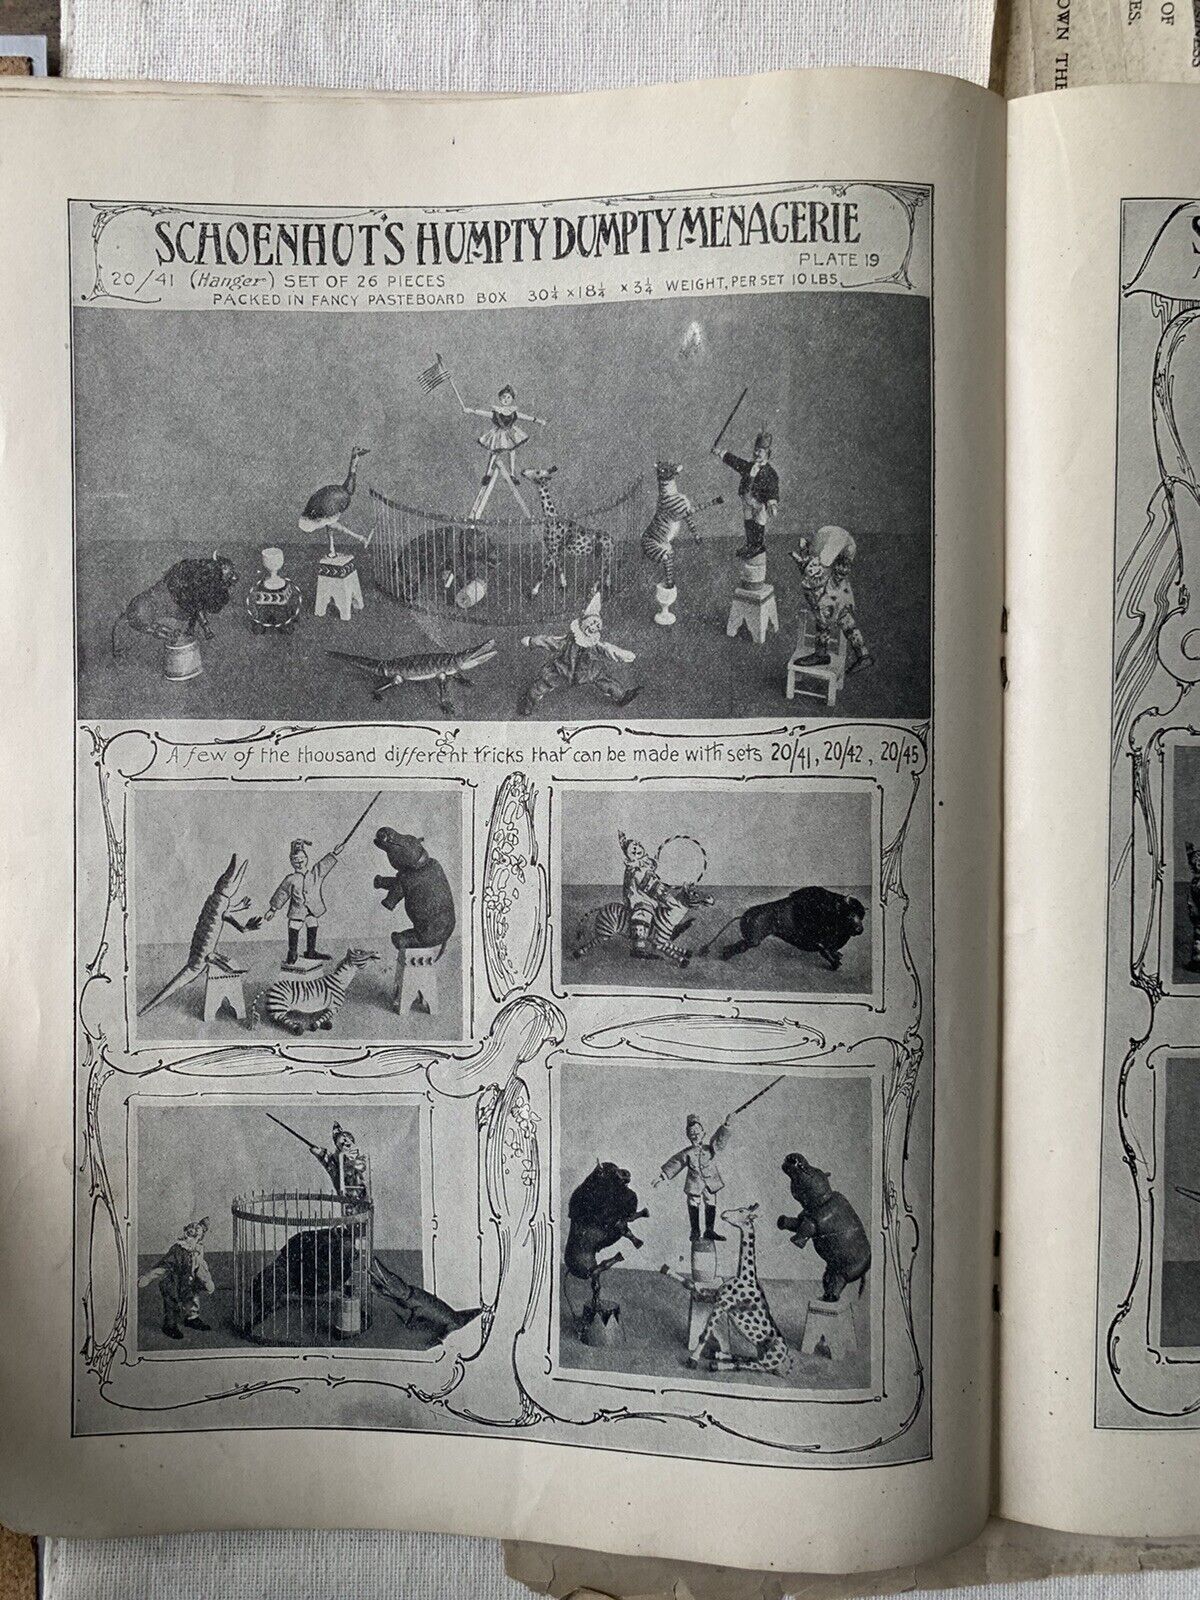 Schoenhut 1918 Humpty Dumpty Circus Catalog- 43 Pages- No Outside Cover